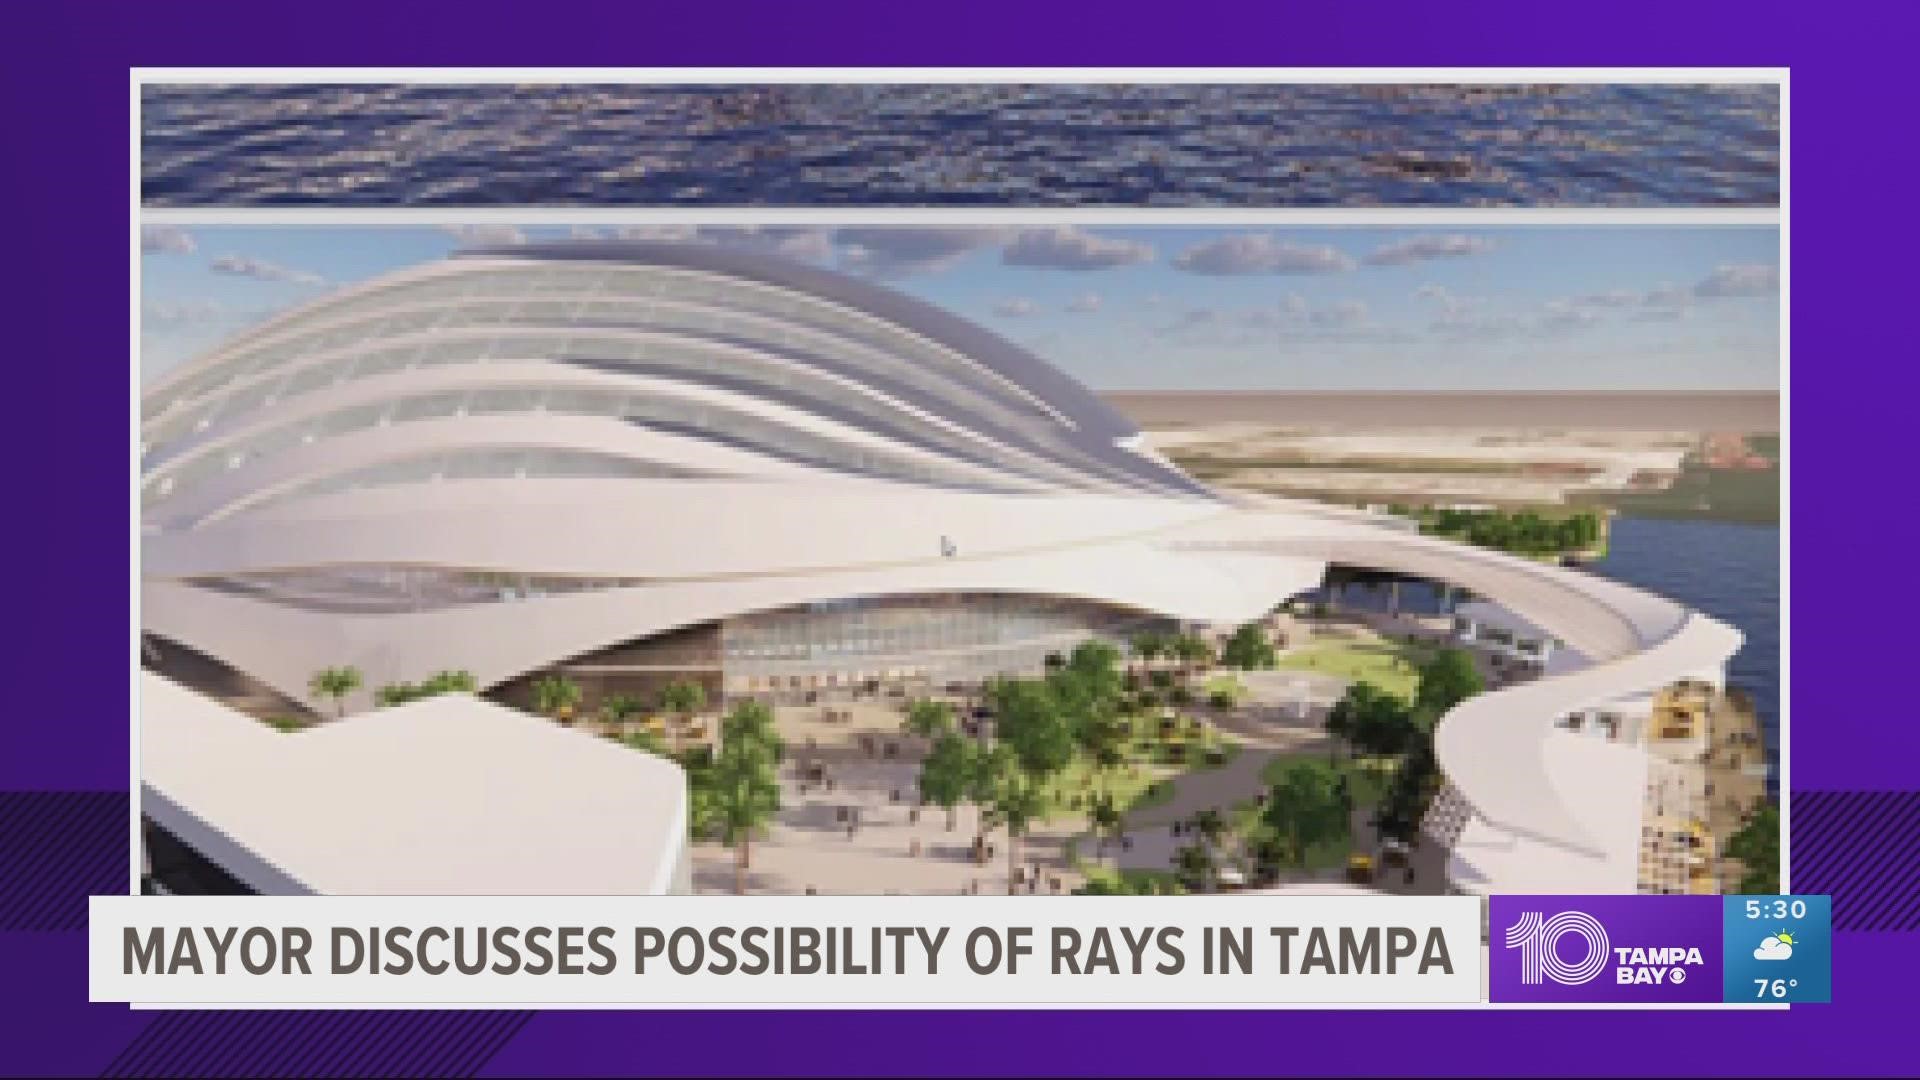 While Mayor Jane Castor said she hasn't been a part of any development plans recently, she's in support of moving the Tampa Bay Rays across the Bay.